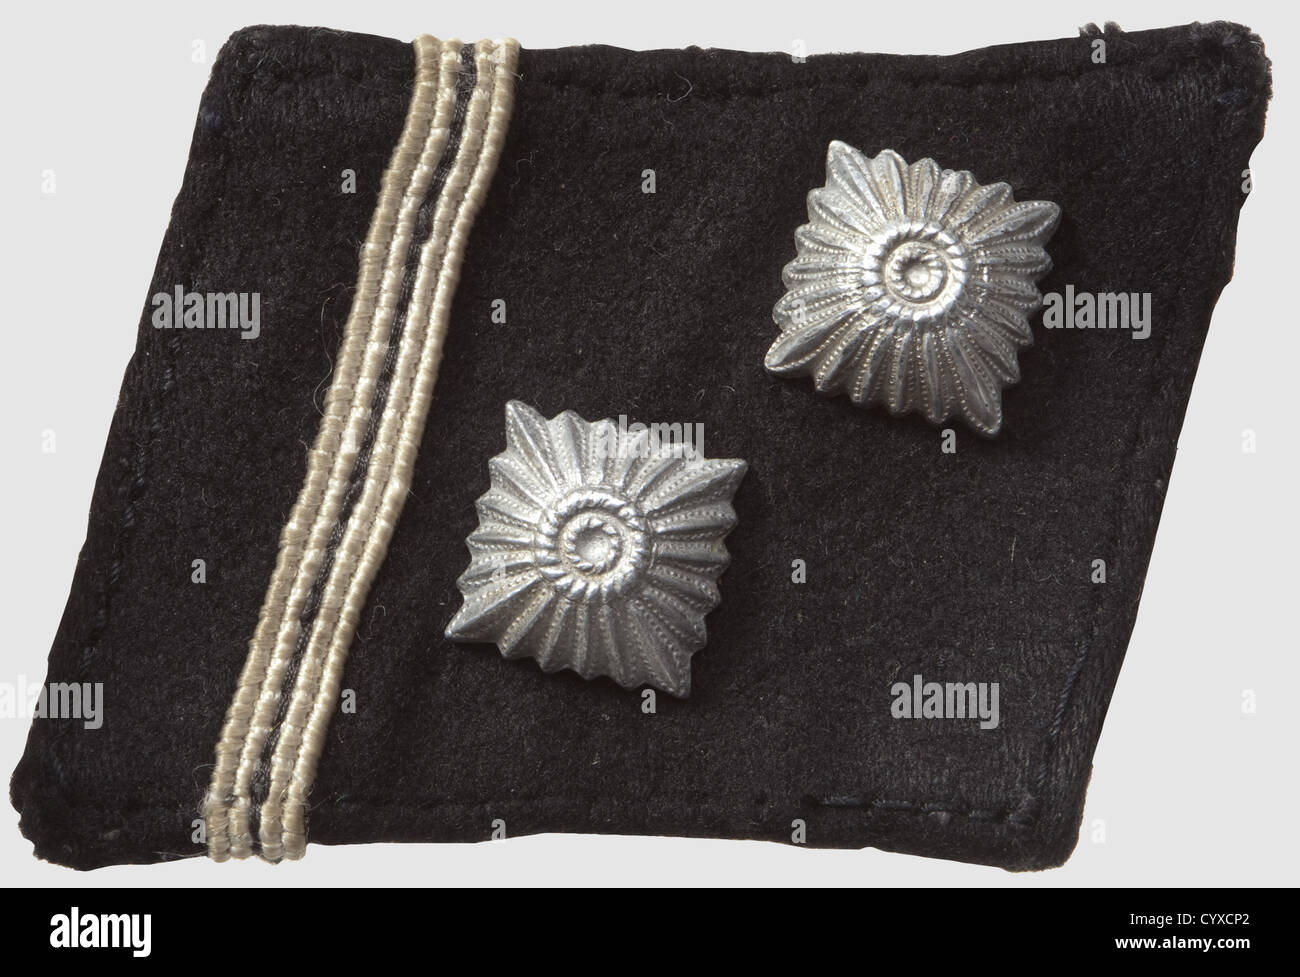 Collar patch for 'SS-Hauptscharführer', of black wool on a glued linen inlay, historic, historical, 1930s, 1930s, 20th century, secret service, security service, secret services, security services, police, armed service, armed services, NS, National Socialism, Nazism, Third Reich, German Reich, Germany, utensil, piece of equipment, utensils, object, objects, stills, clipping, clippings, cut out, cut-out, cut-outs, fascism, fascistic, National Socialist, Nazi, Nazi period, uniform, uniforms, detail, details, Additional-Rights-Clearences-Not Available Stock Photo